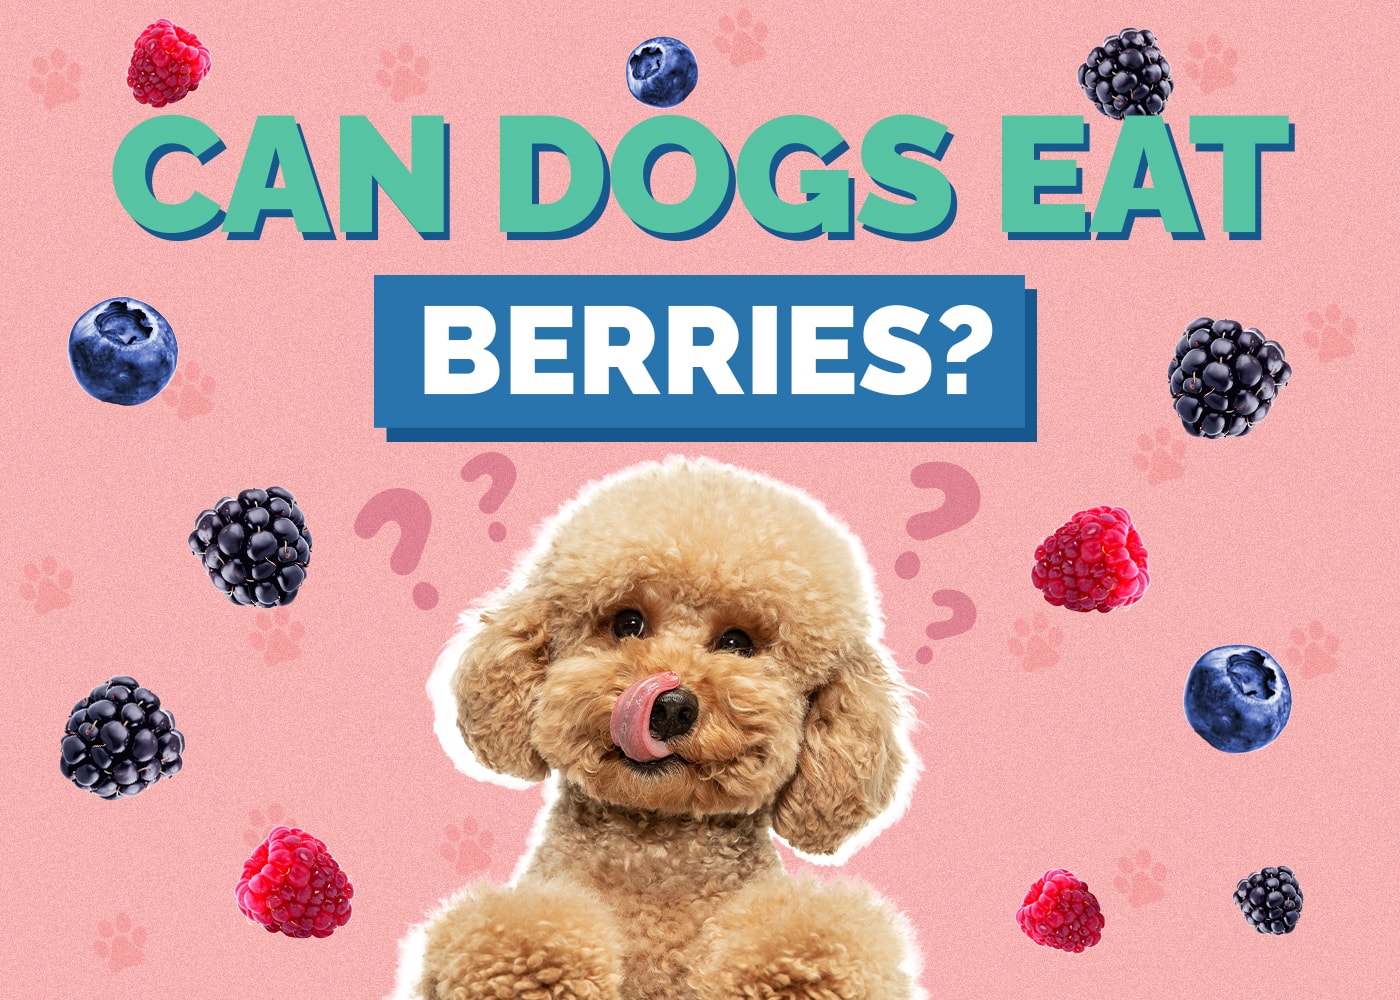 Can Dog Eat berries